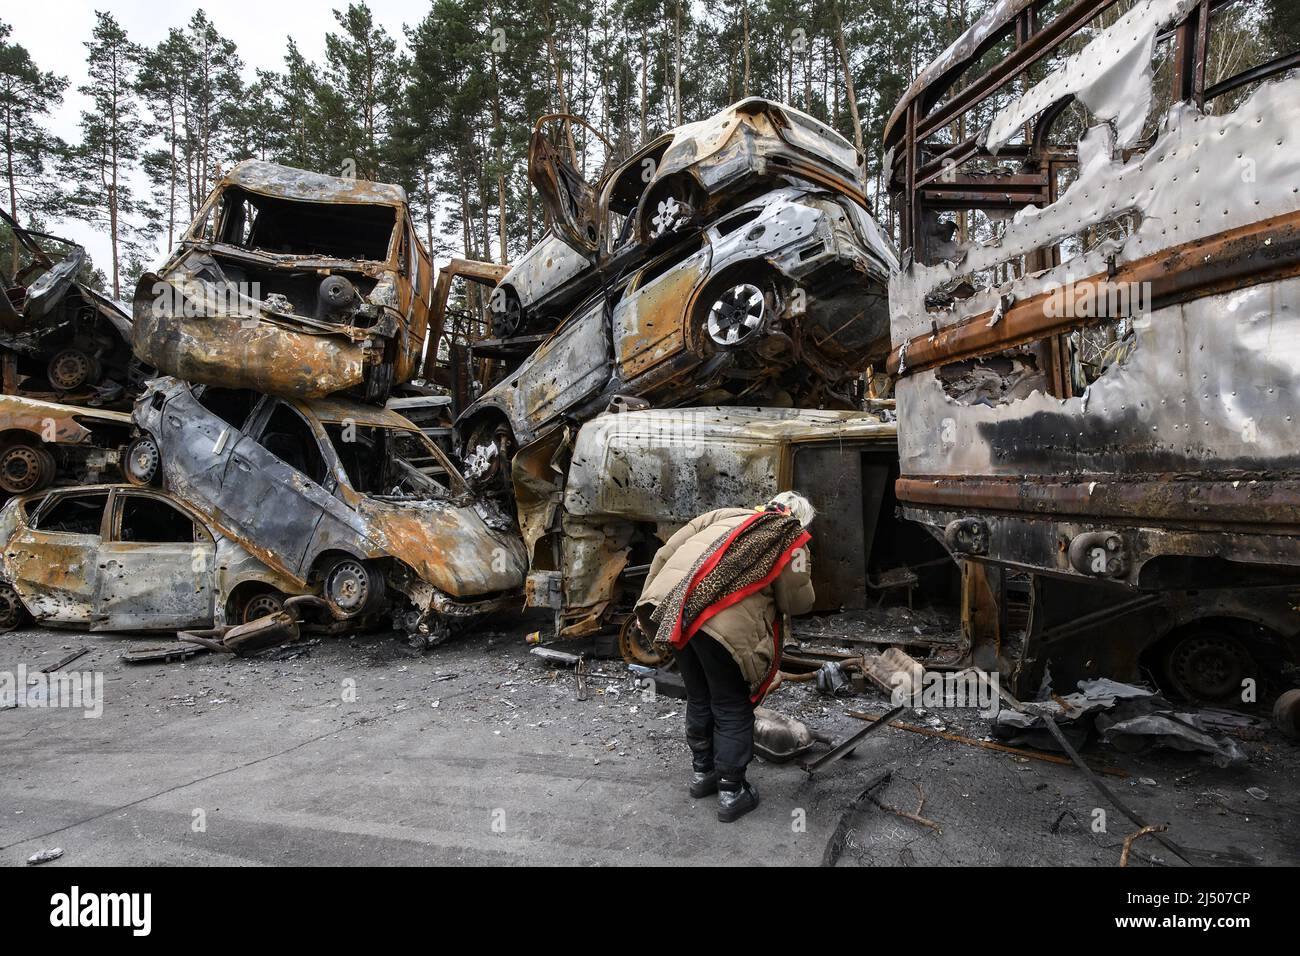 A Ukrainian woman looks at cars destroyed during the ongoing Russian invasion of Ukraine, at a junkyard in Irpin, Ukraine on Monday, April 18 2022. Russian troops entered Ukrainian territory resulting in fighting and destruction in the country, a huge flow of refugees, and multiple sanctions against Russia. Photo by Vladyslav Musiienko/UPI Credit: UPI/Alamy Live News Stock Photo